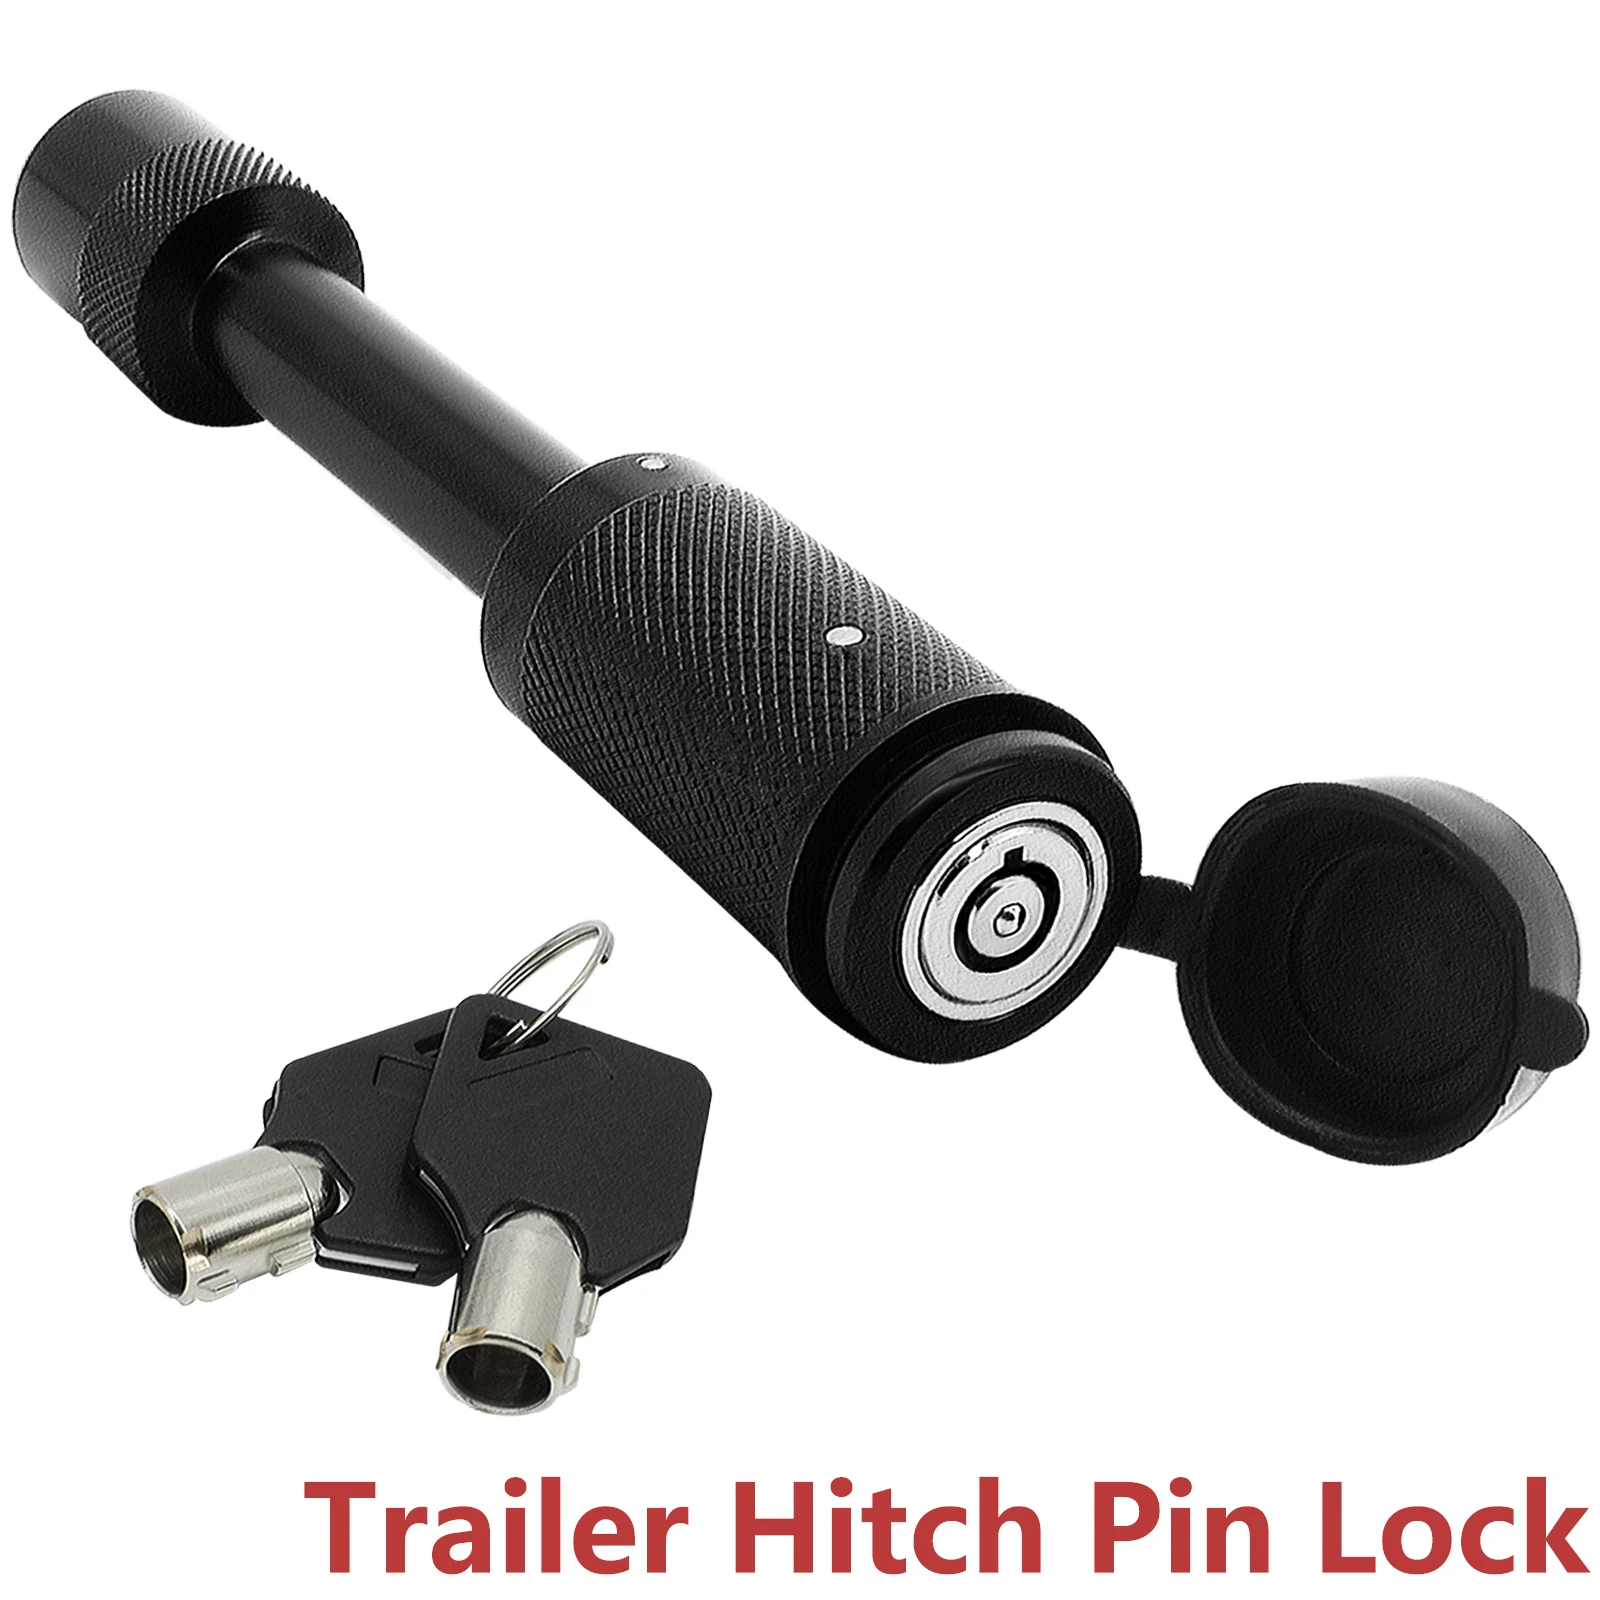 

5/8" Hitch Pin Lock with Keys for RV Truck Trailer Tow Receiver Universal Car Accessories Anti Theft With 2 Keys